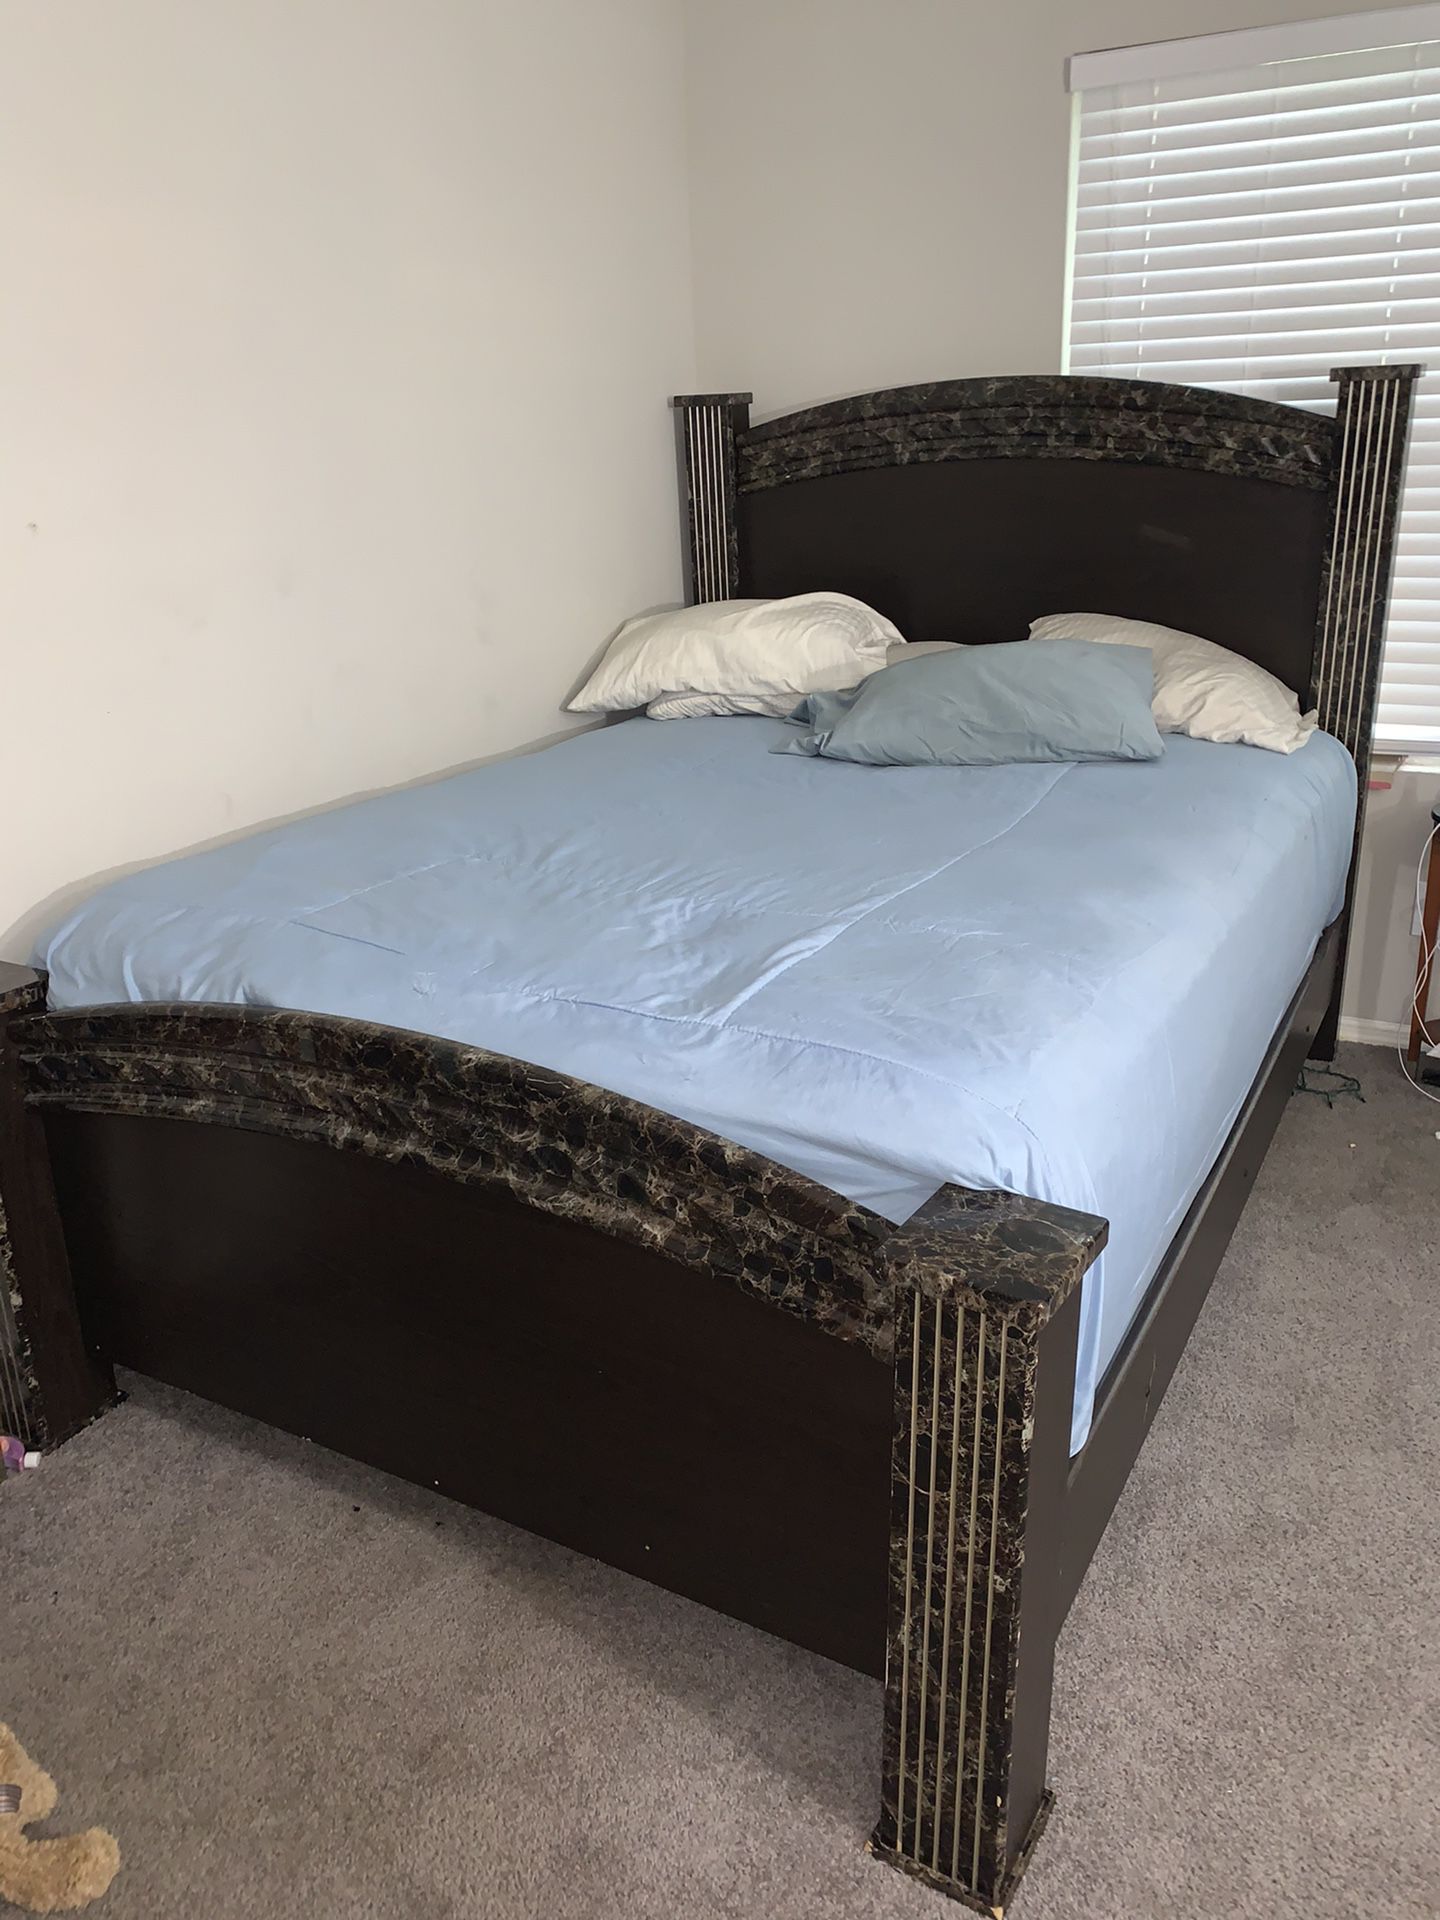 Queen headboard and frame